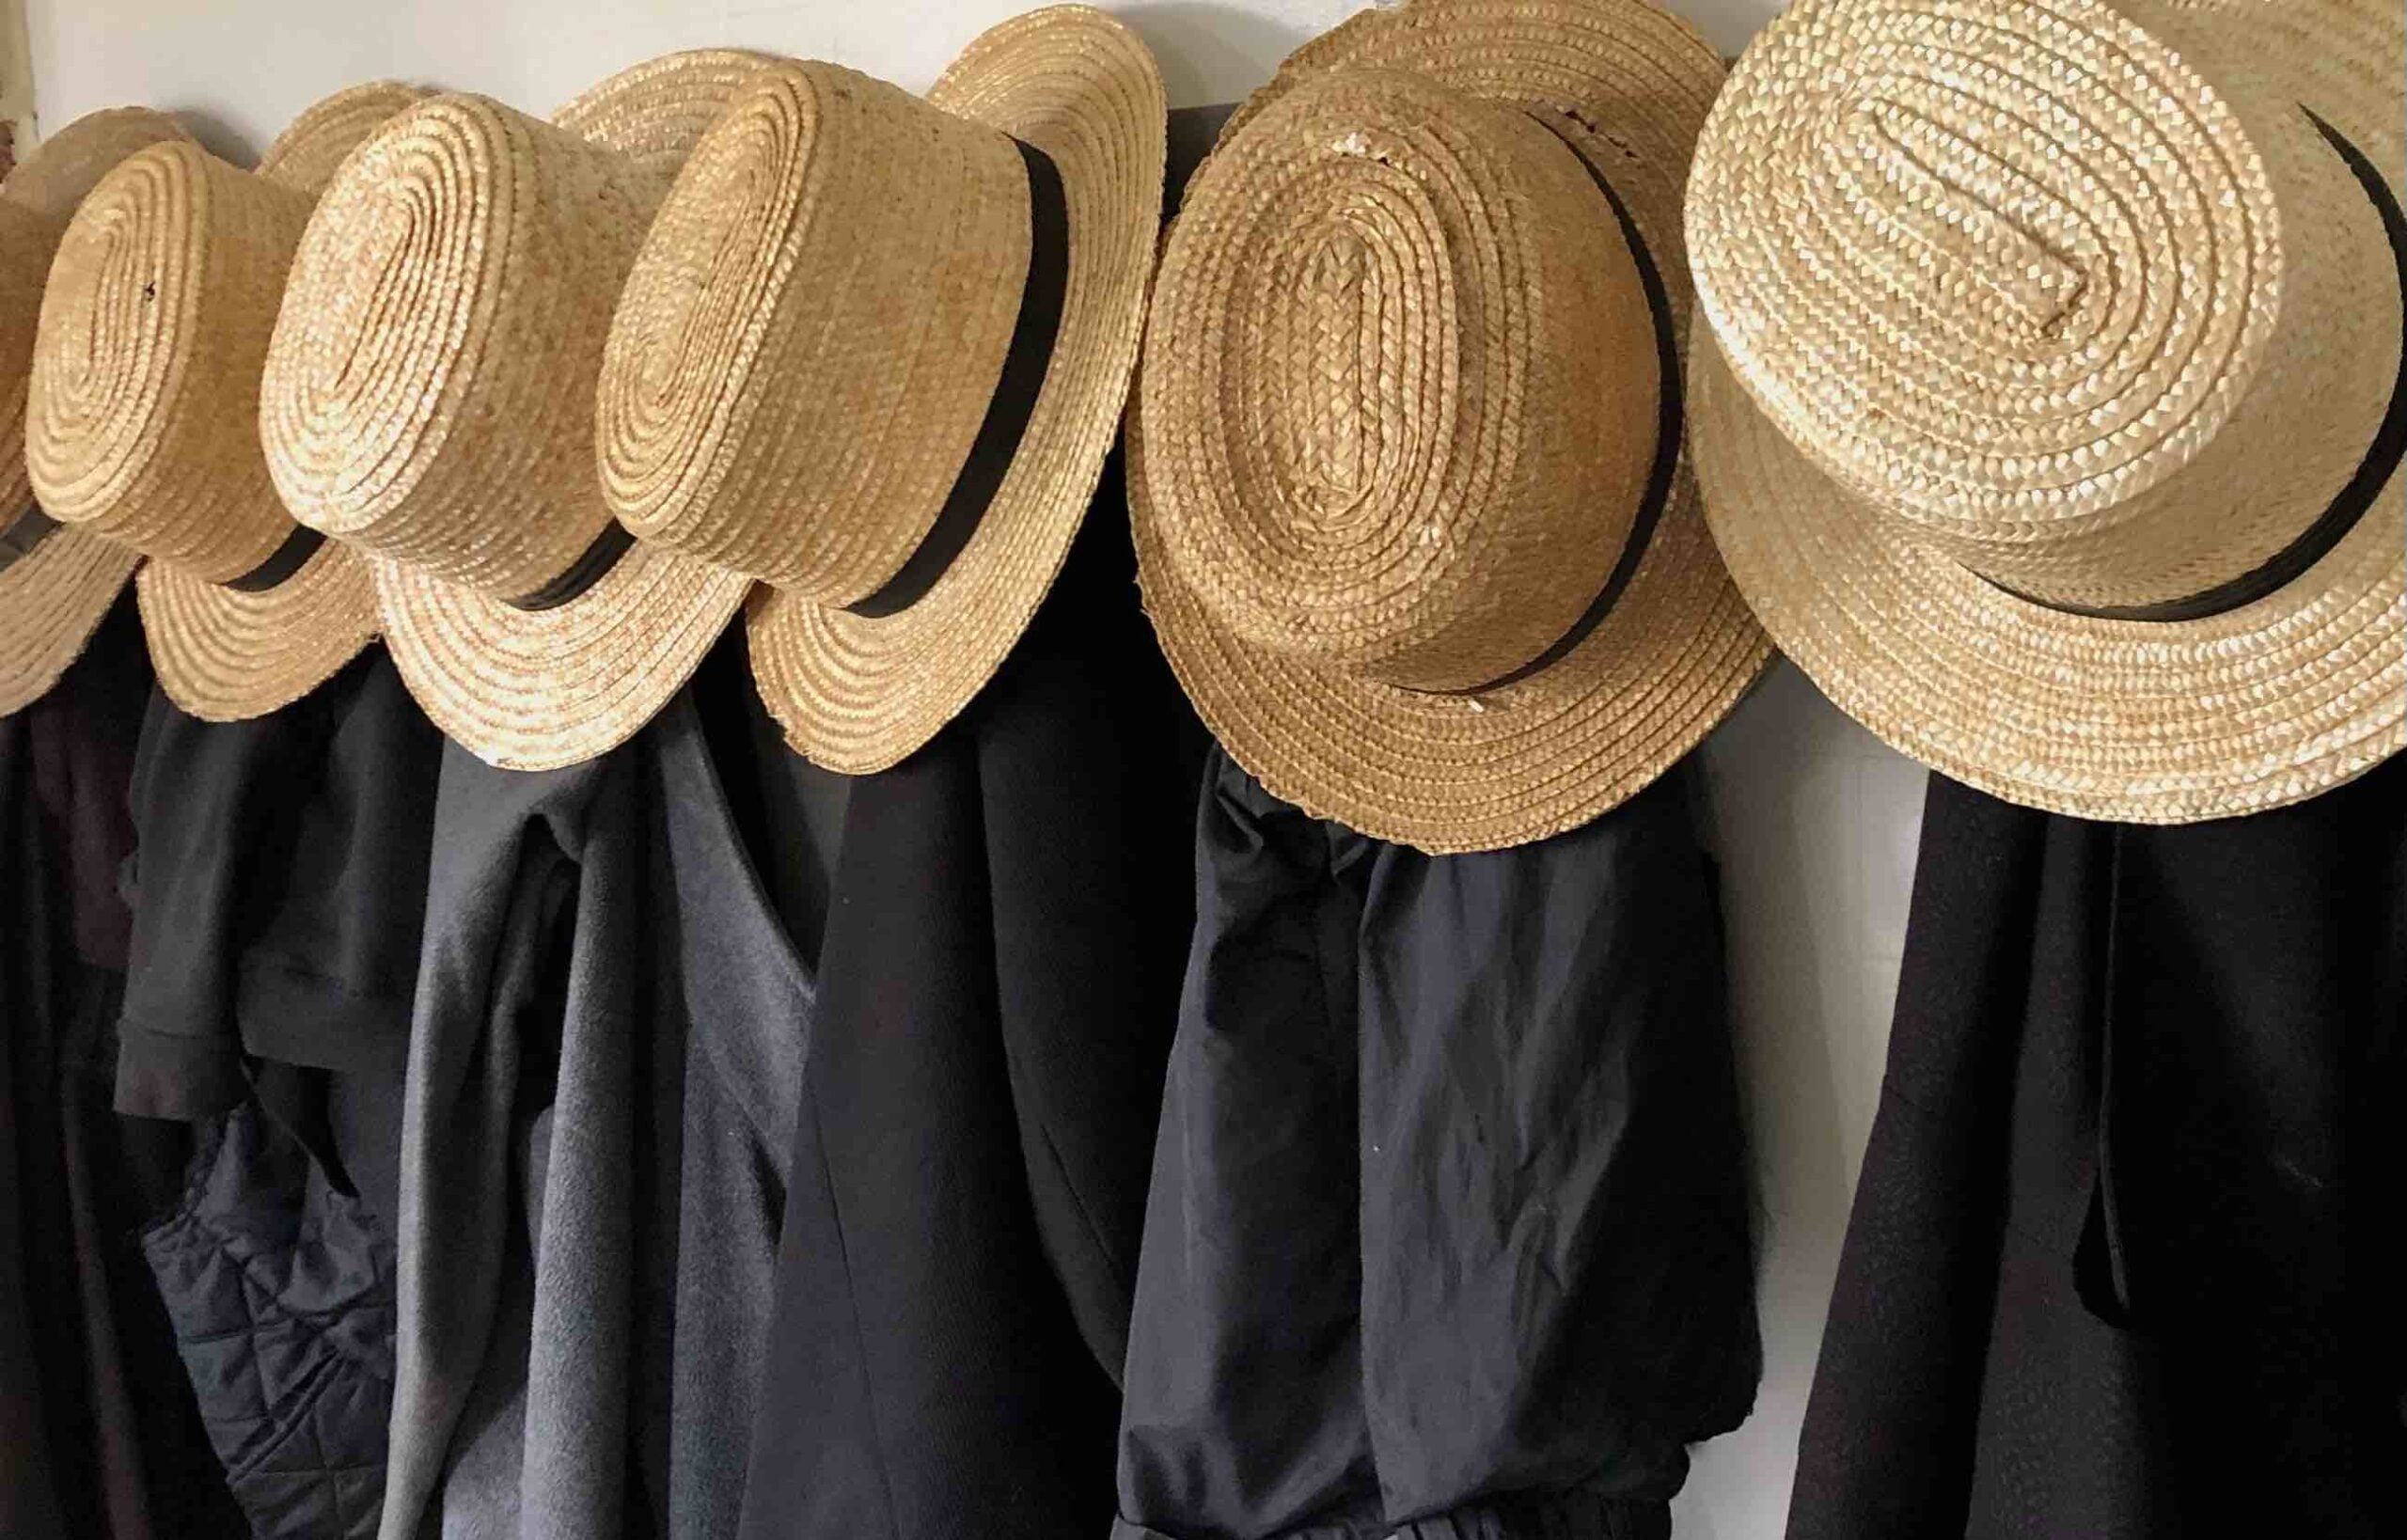 Amish clothing hanging in a row on a wall.